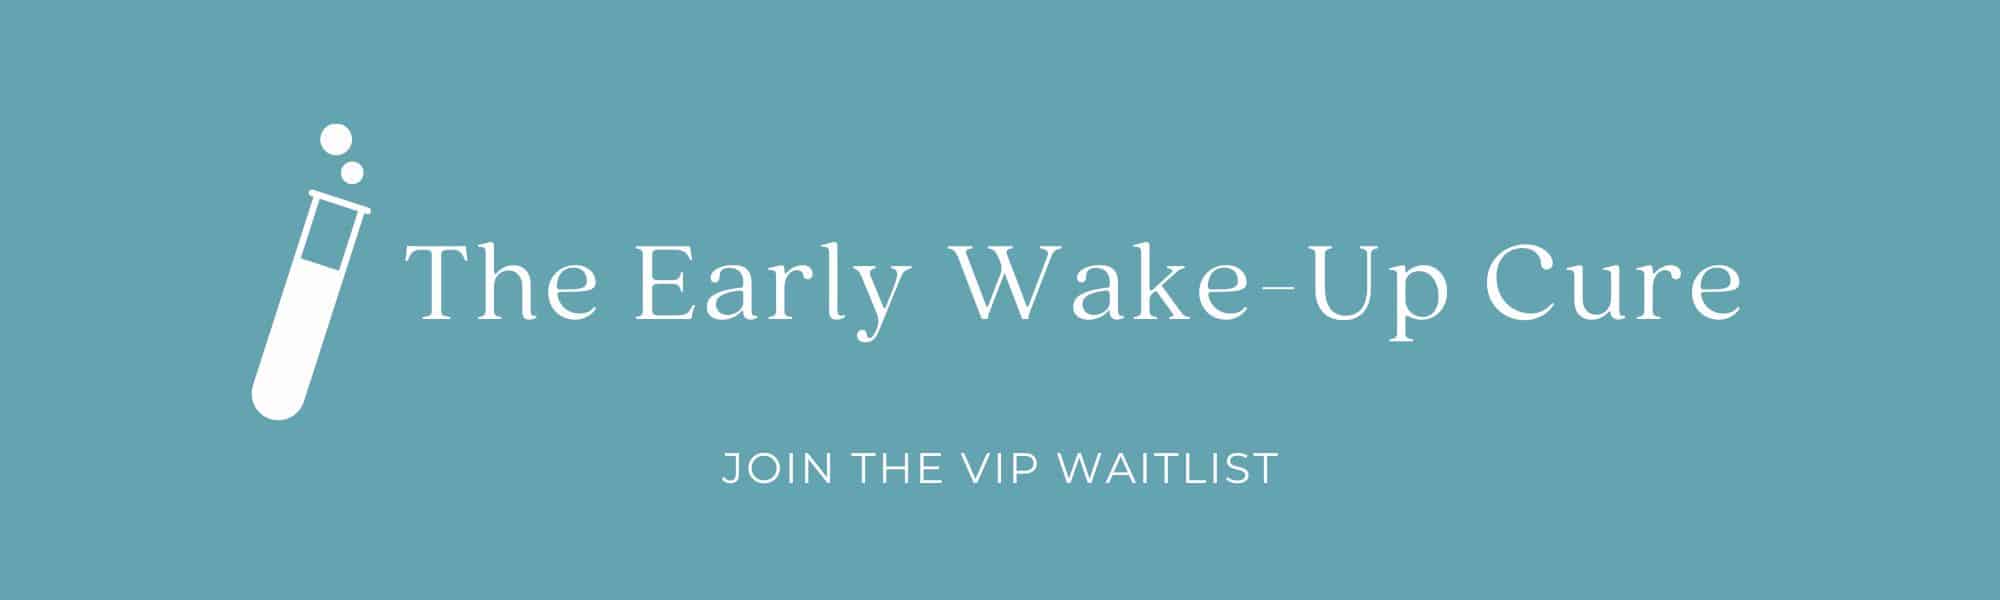 EARLY WAKE UP WAITLIST BANNER